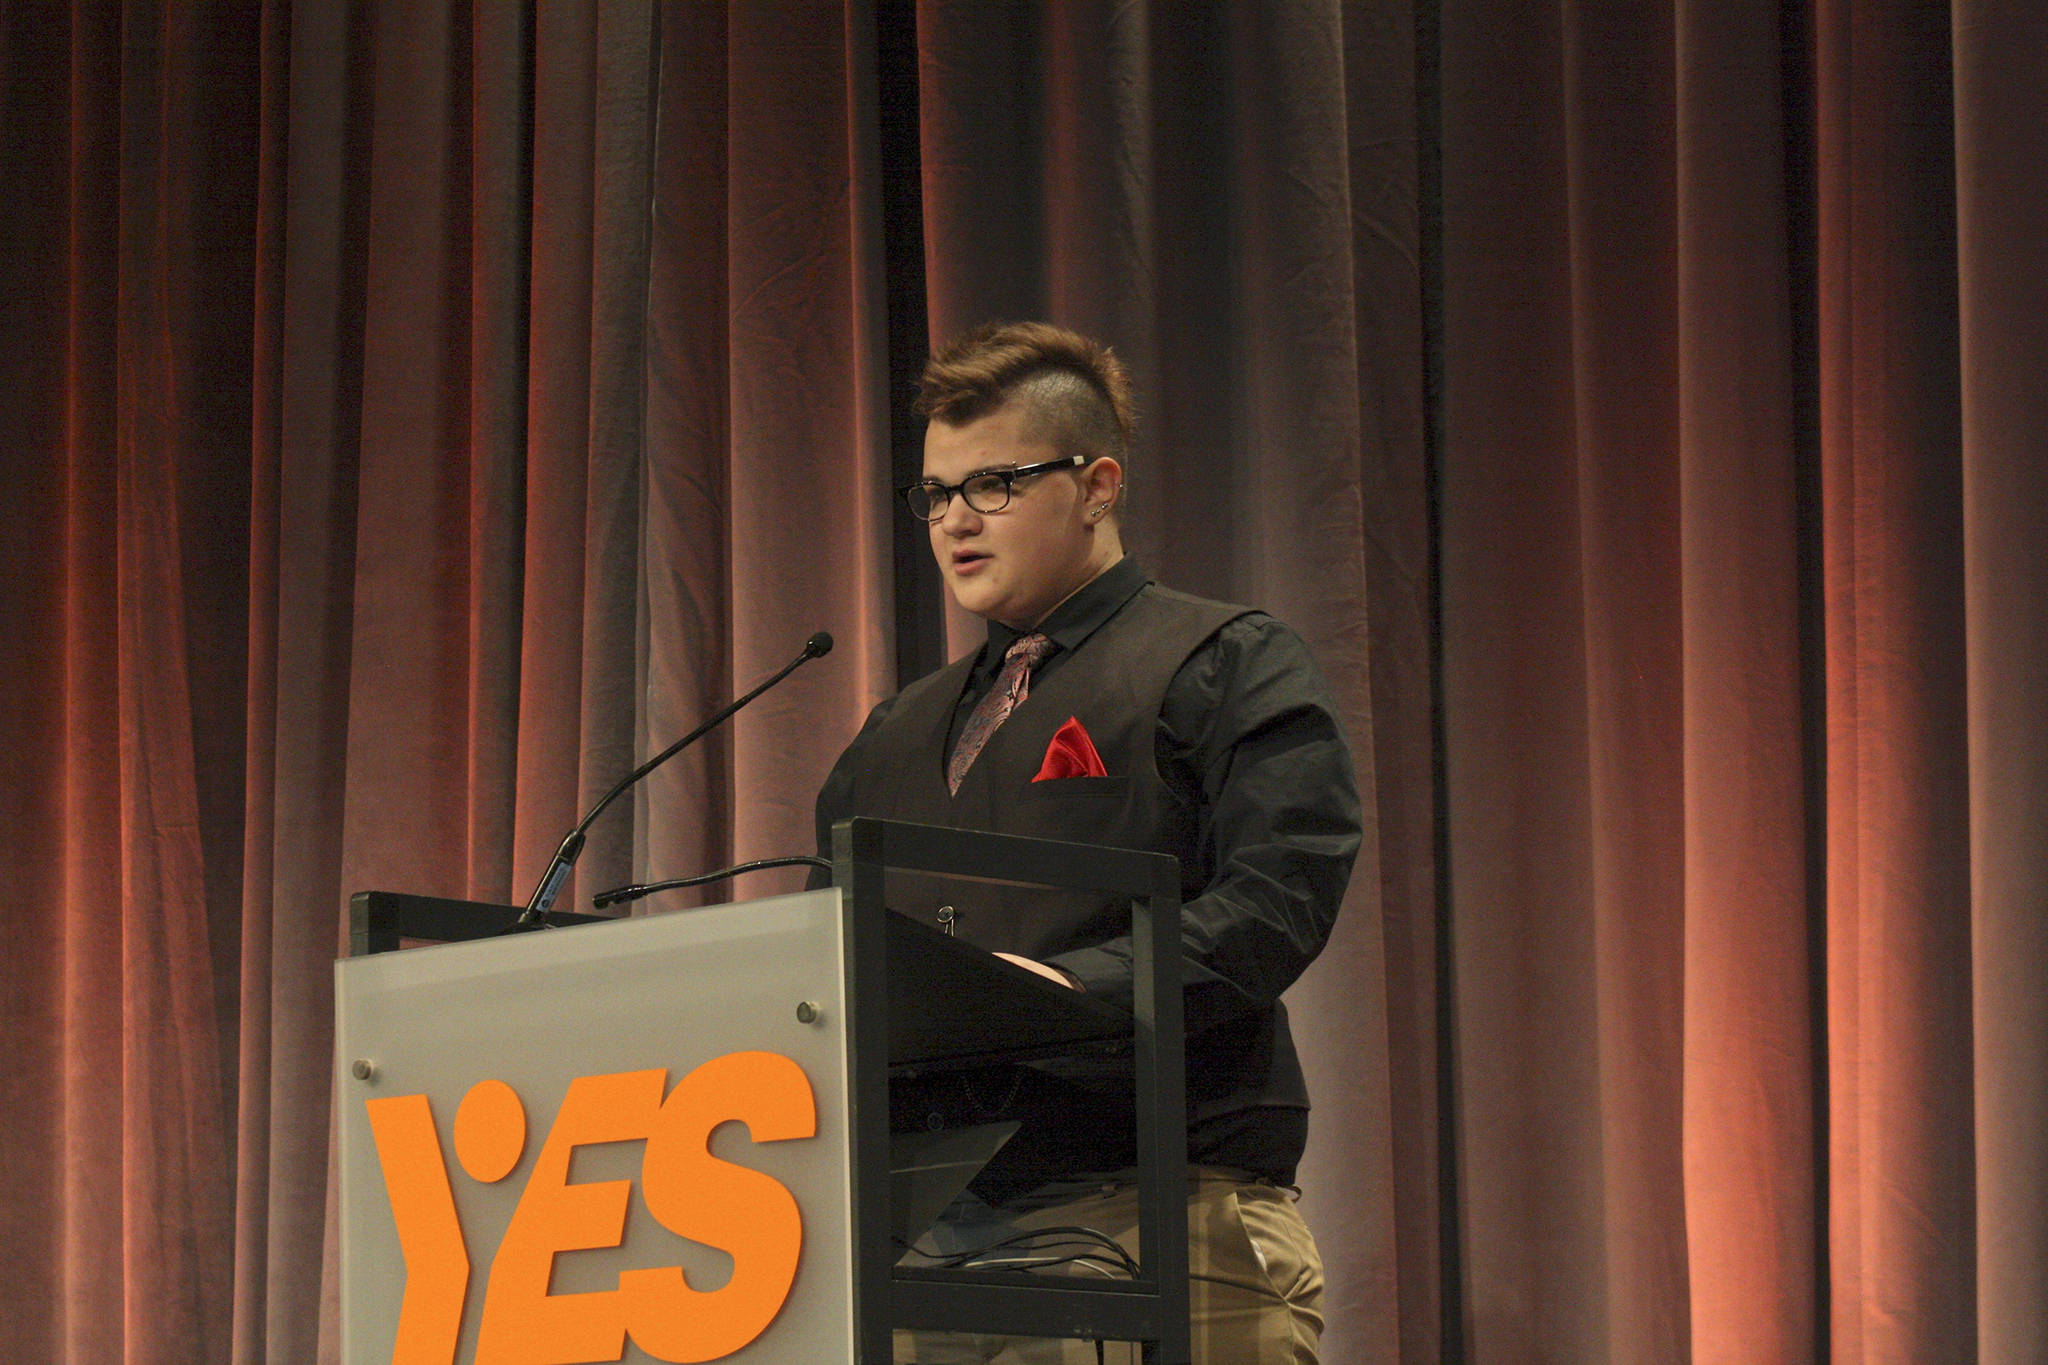 Redmond teen Mason Bernardo speaks about his challenges struggling with gender identity, self-harm and abusive relationships at the Youth Eastside Services breakfast on Wednesday morning. Bernardo, who was born female, has begun transitioning to a male. He spoke of hurting himself in deep depression and anxiety, but has since received help from Youth Eastside Services. Ryan Murray/staff photo